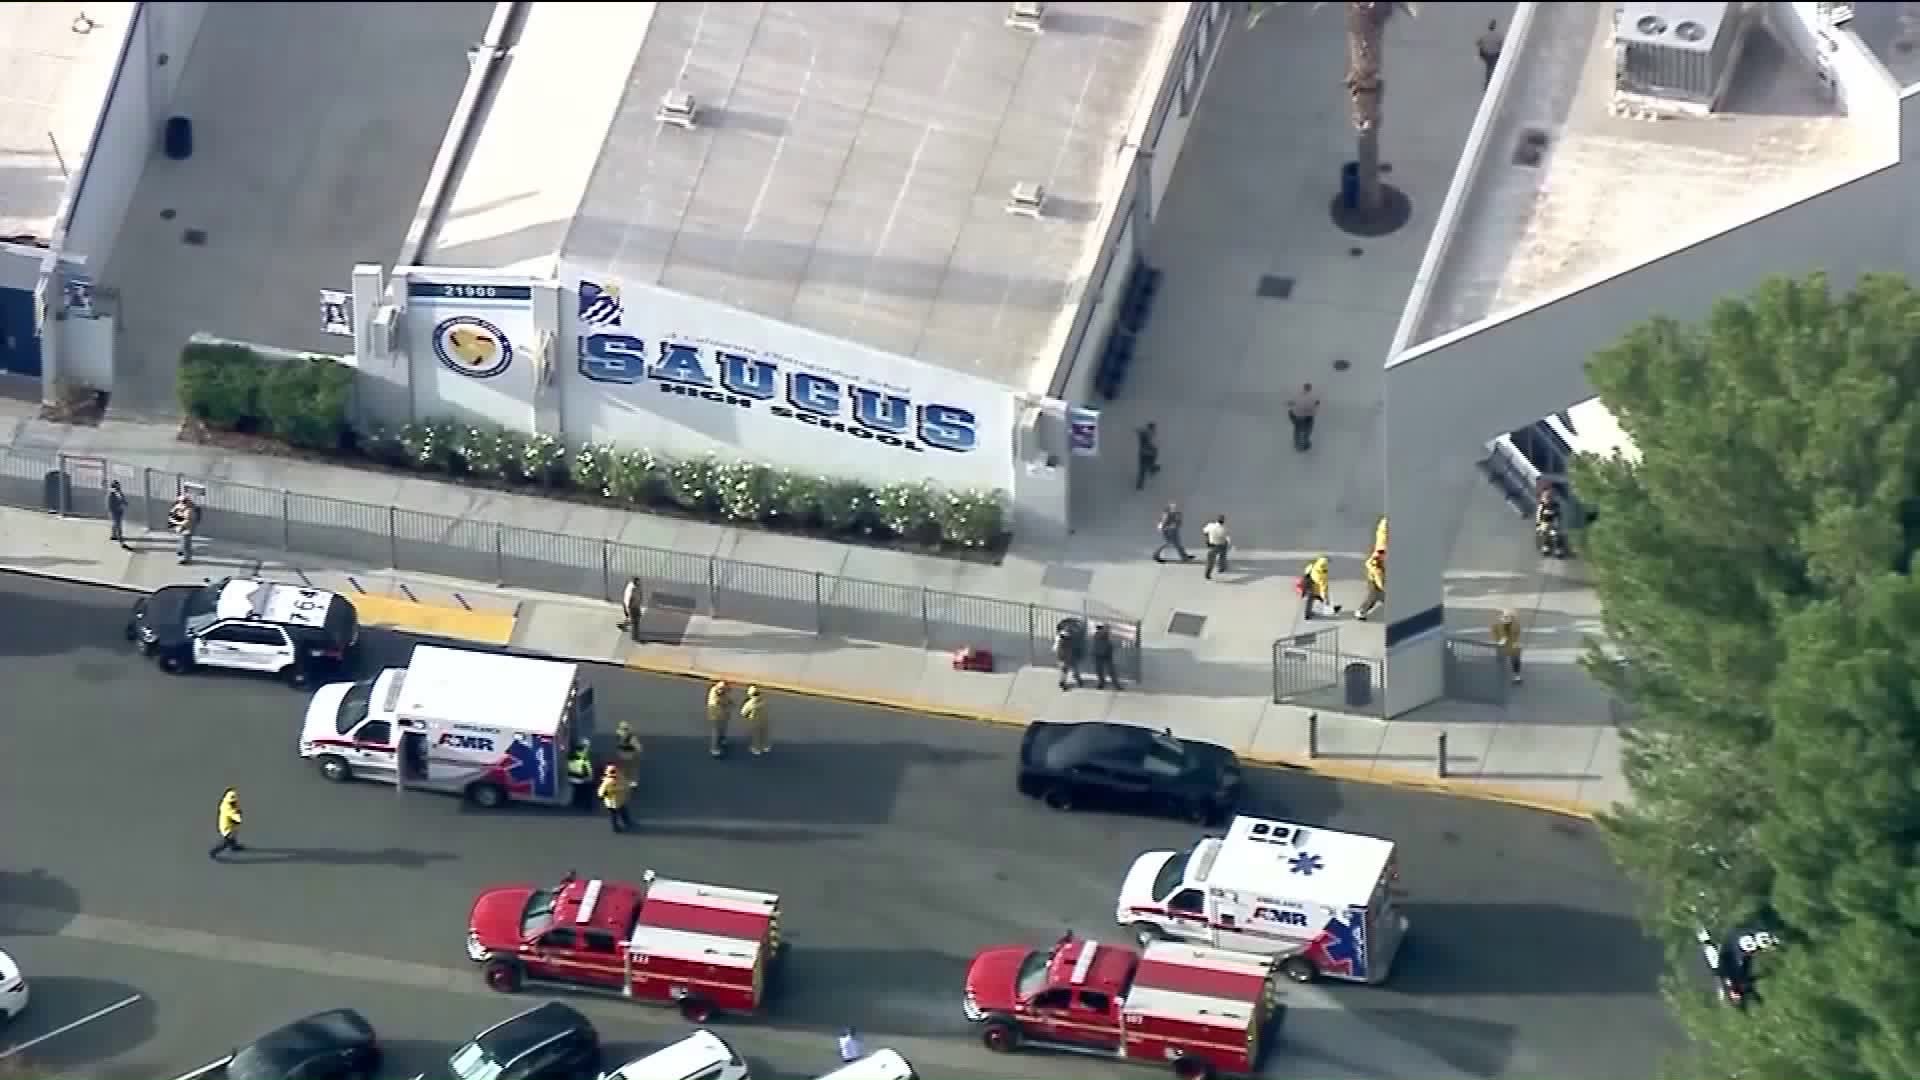 Southern California high school shooting -lawmakers discuss gun rights